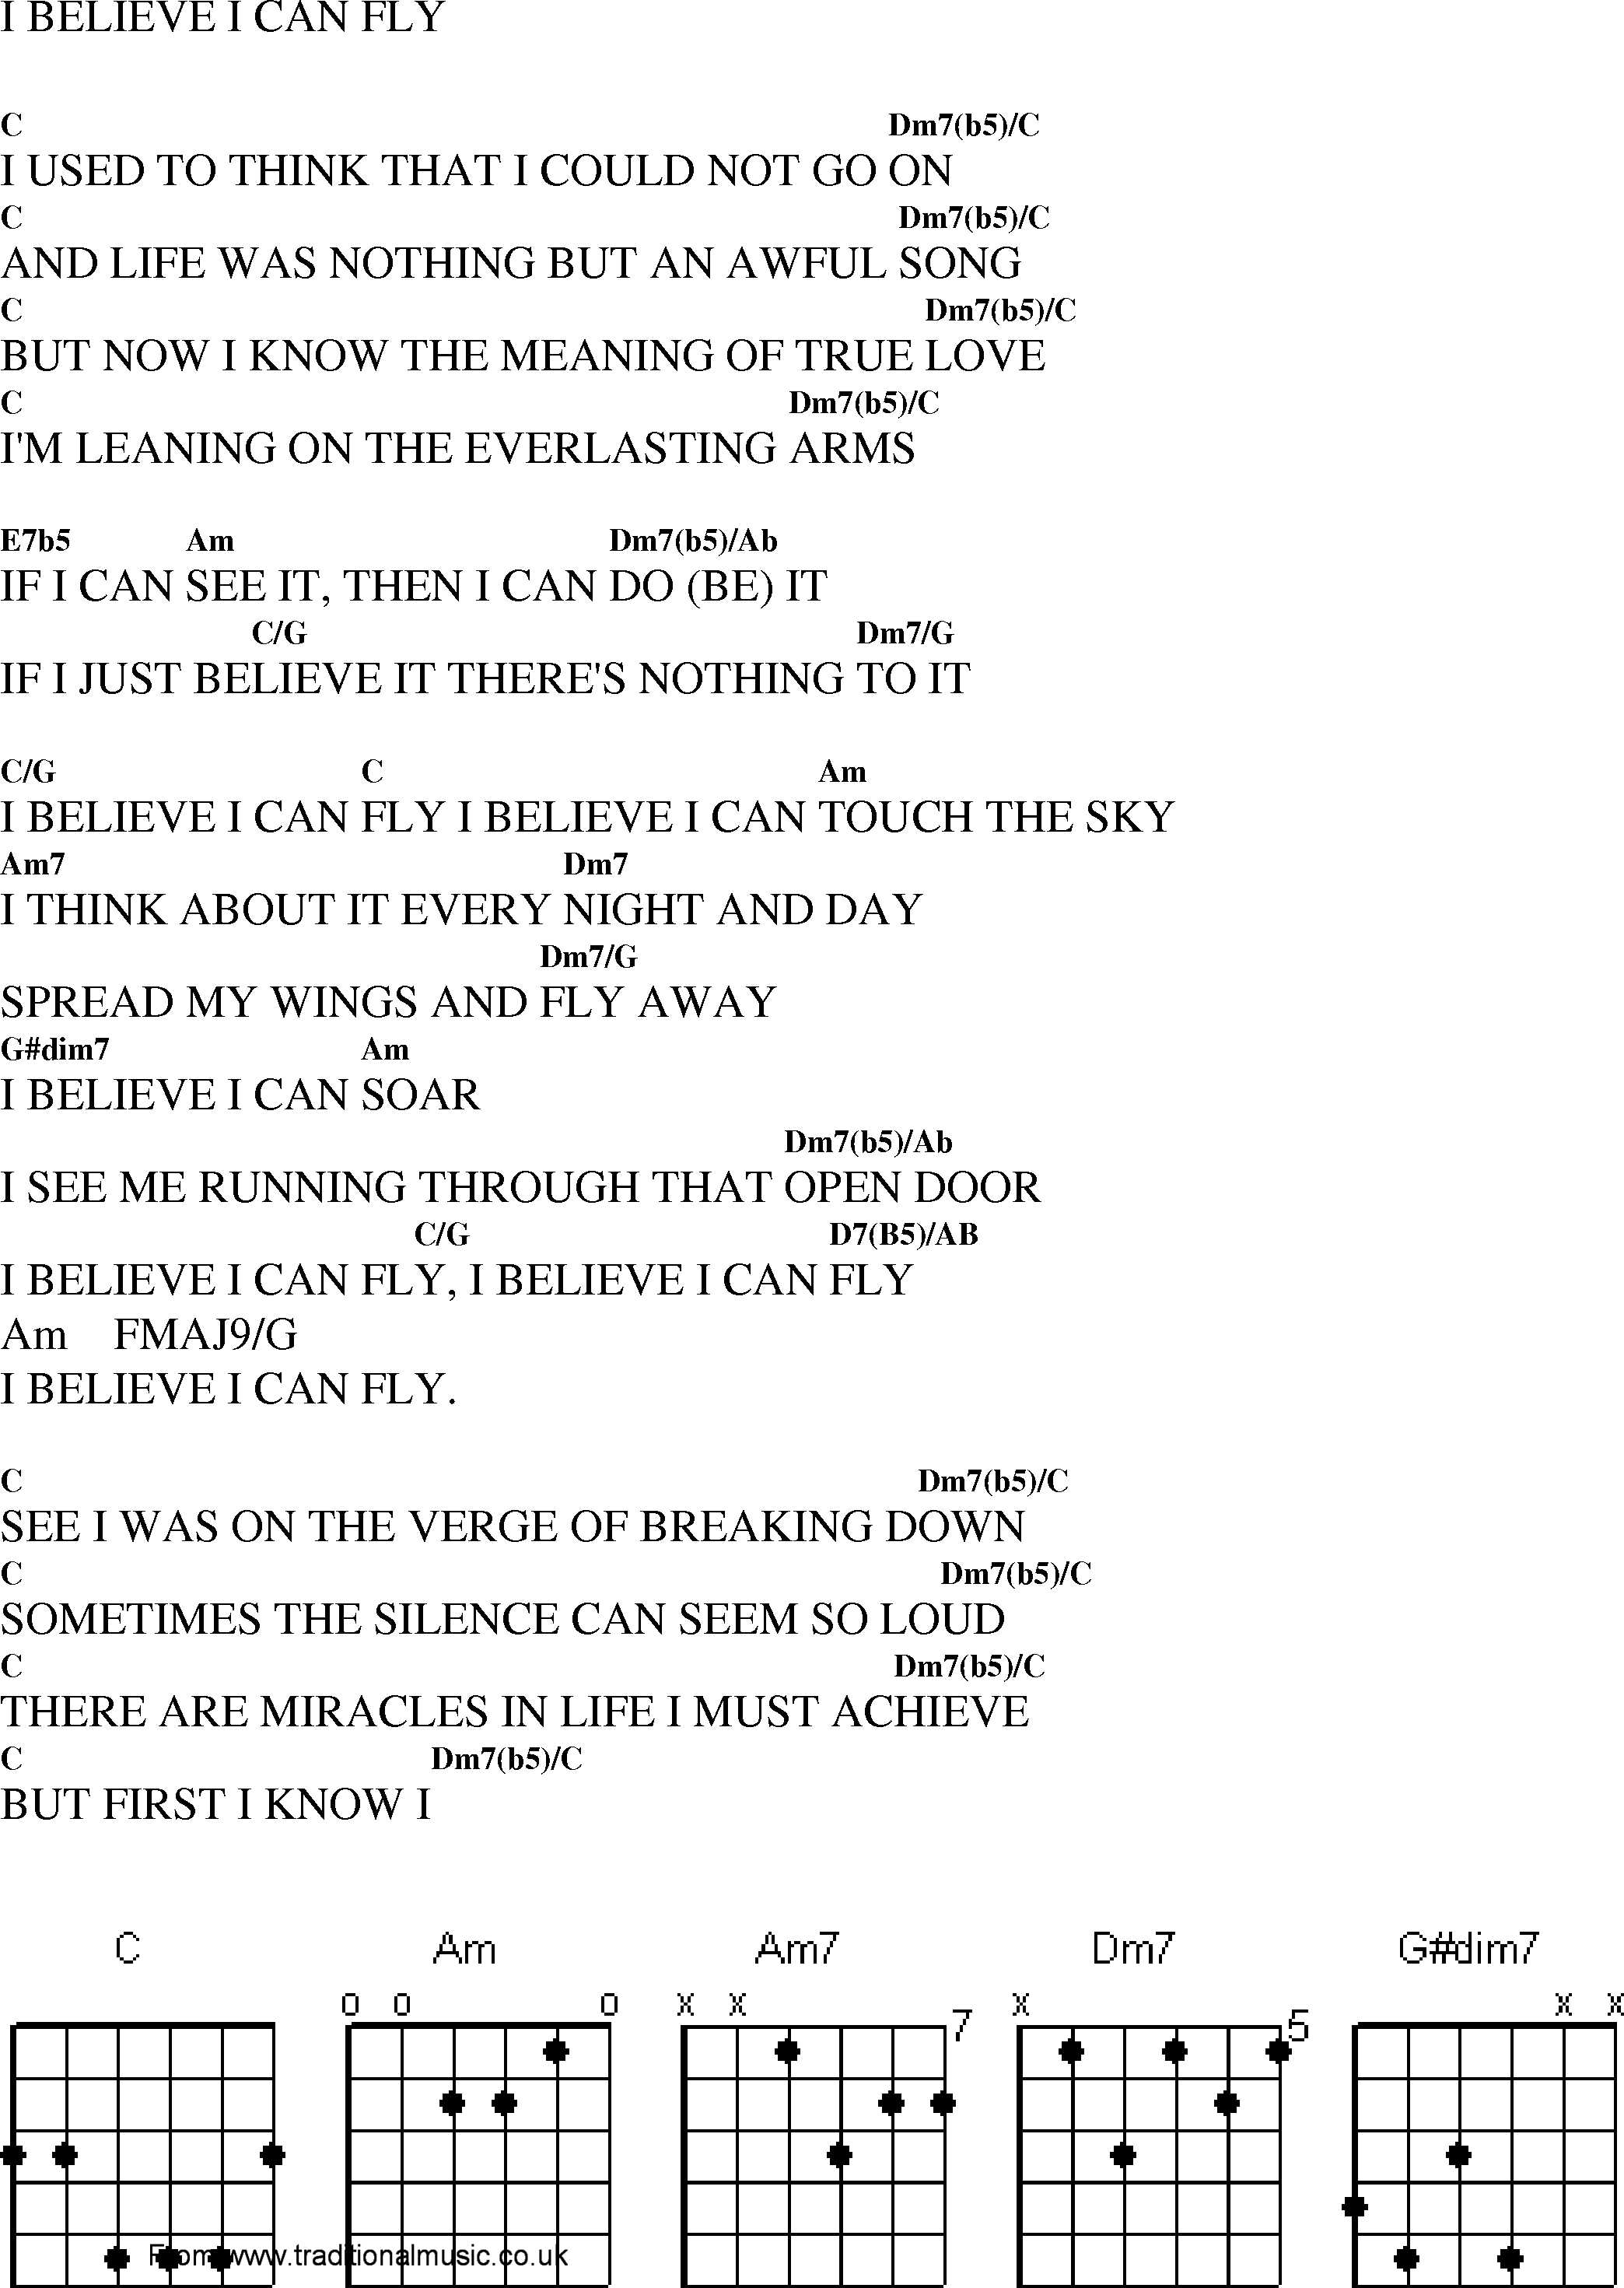 Gospel Song: i_believe_i_can_fly, lyrics and chords.